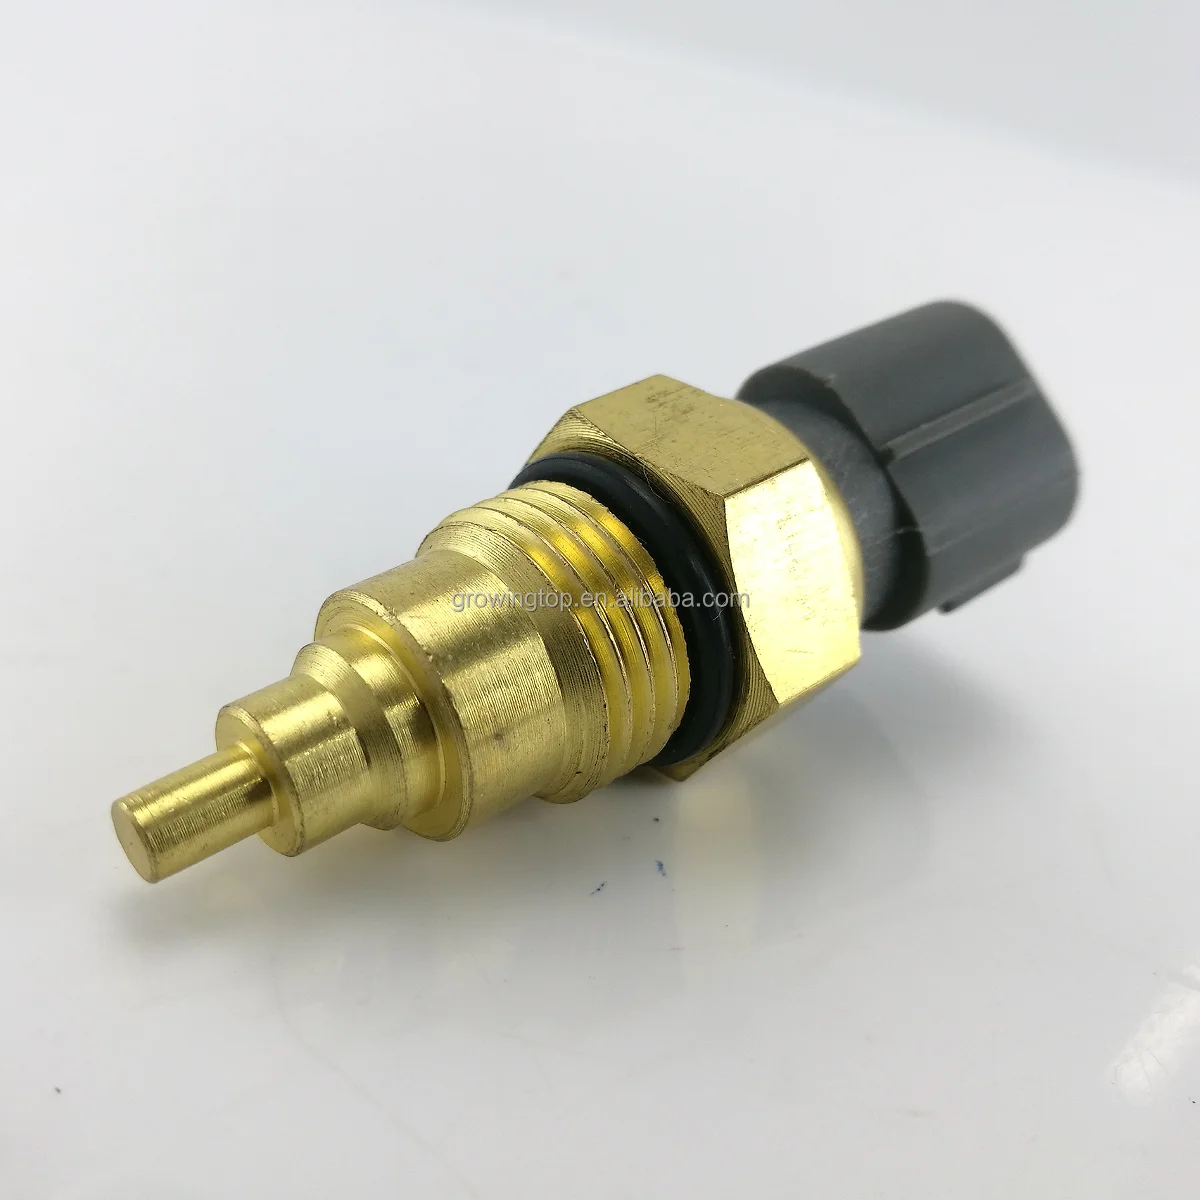 Notonmek Water Temperature Sensor New S8342-01250 Compatible with Hino Excavator EB10-WT016 Compatible with Kobelco Excavator SK200-8 SK210-8 SK260 SK260-8 SK250-8 SK350-8 SK460-8 SK200-3 